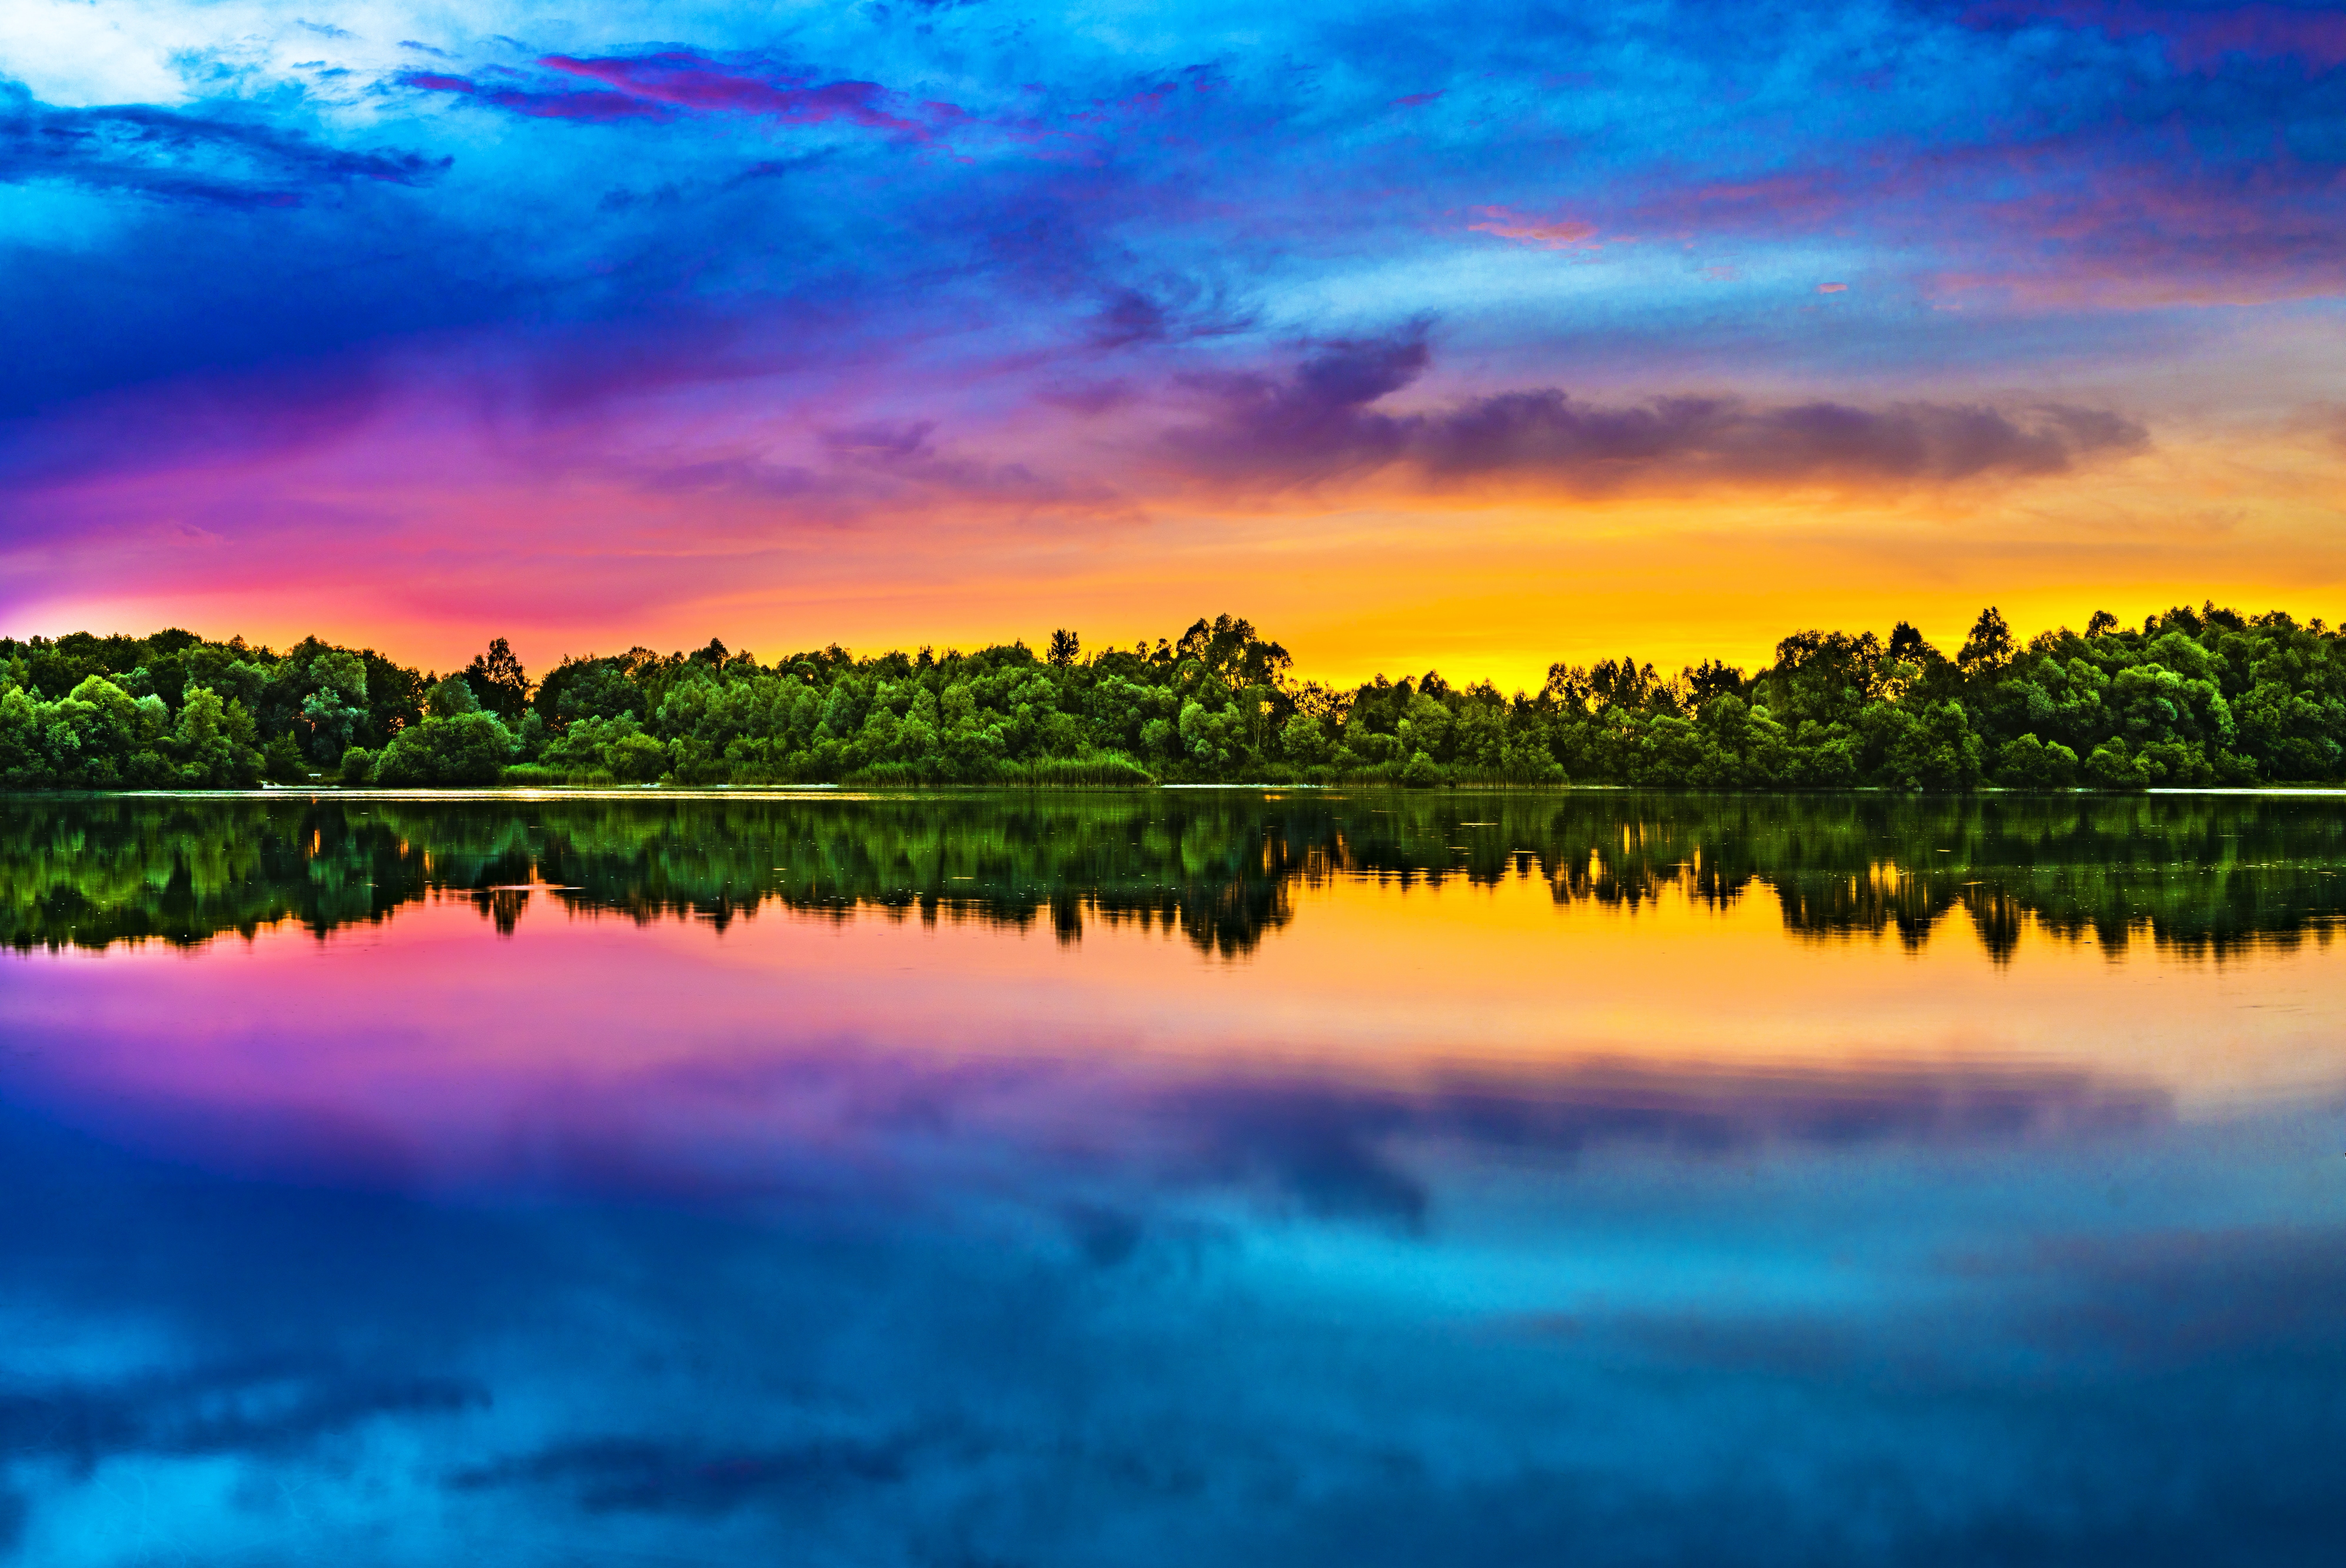 Evening sky Wallpaper 4K, Multicolor, Colorful, Lake reflection, Sunset